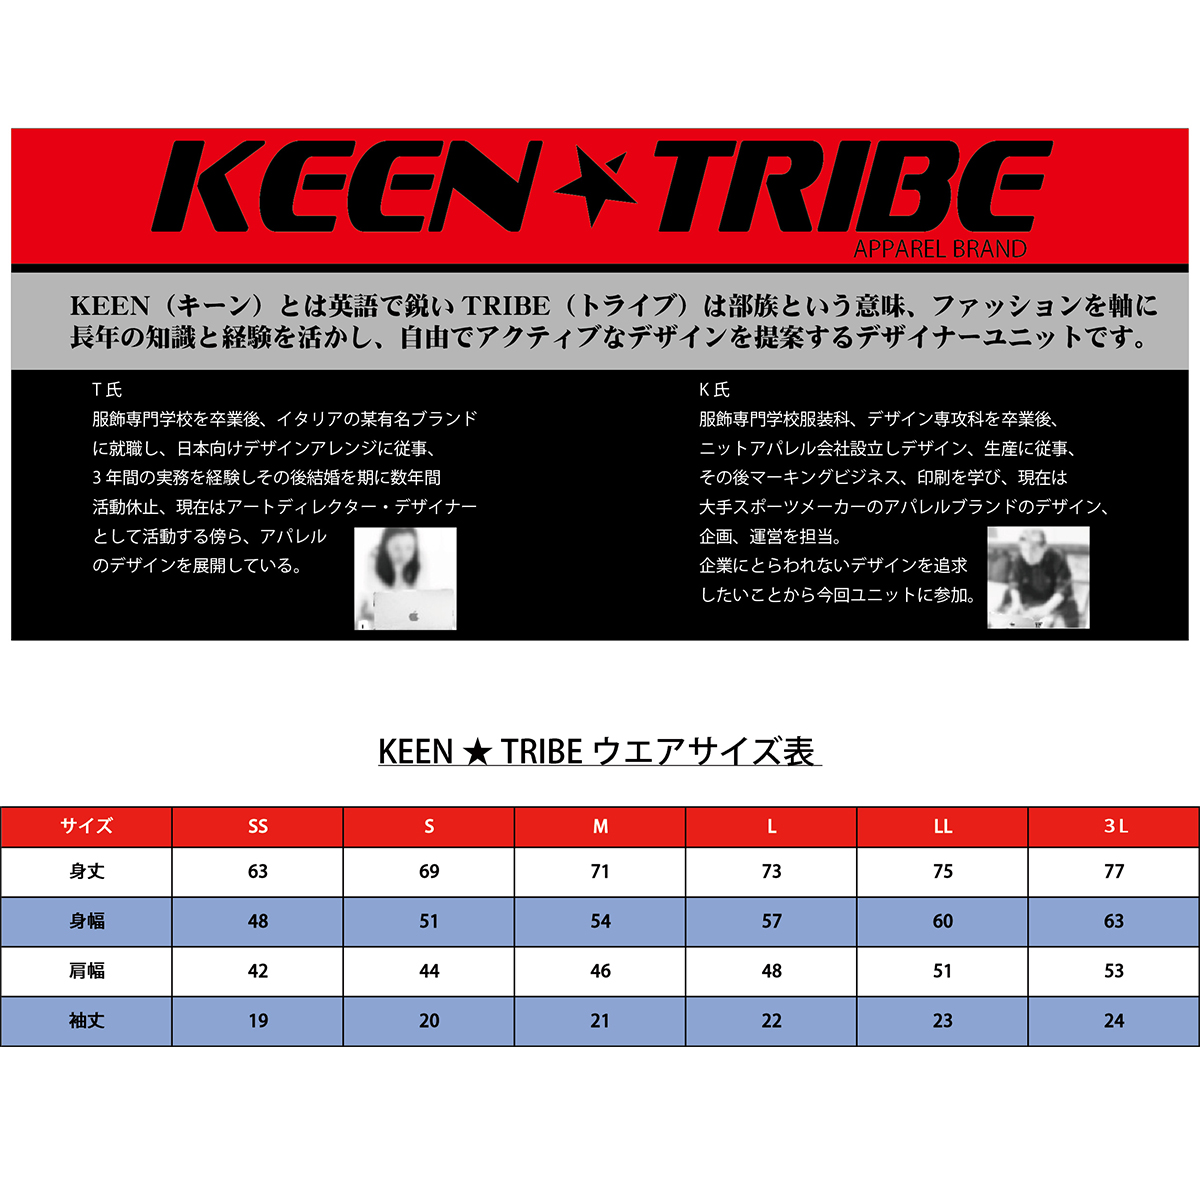 KEEN ★ TRIBE　KT-20(受注生産)